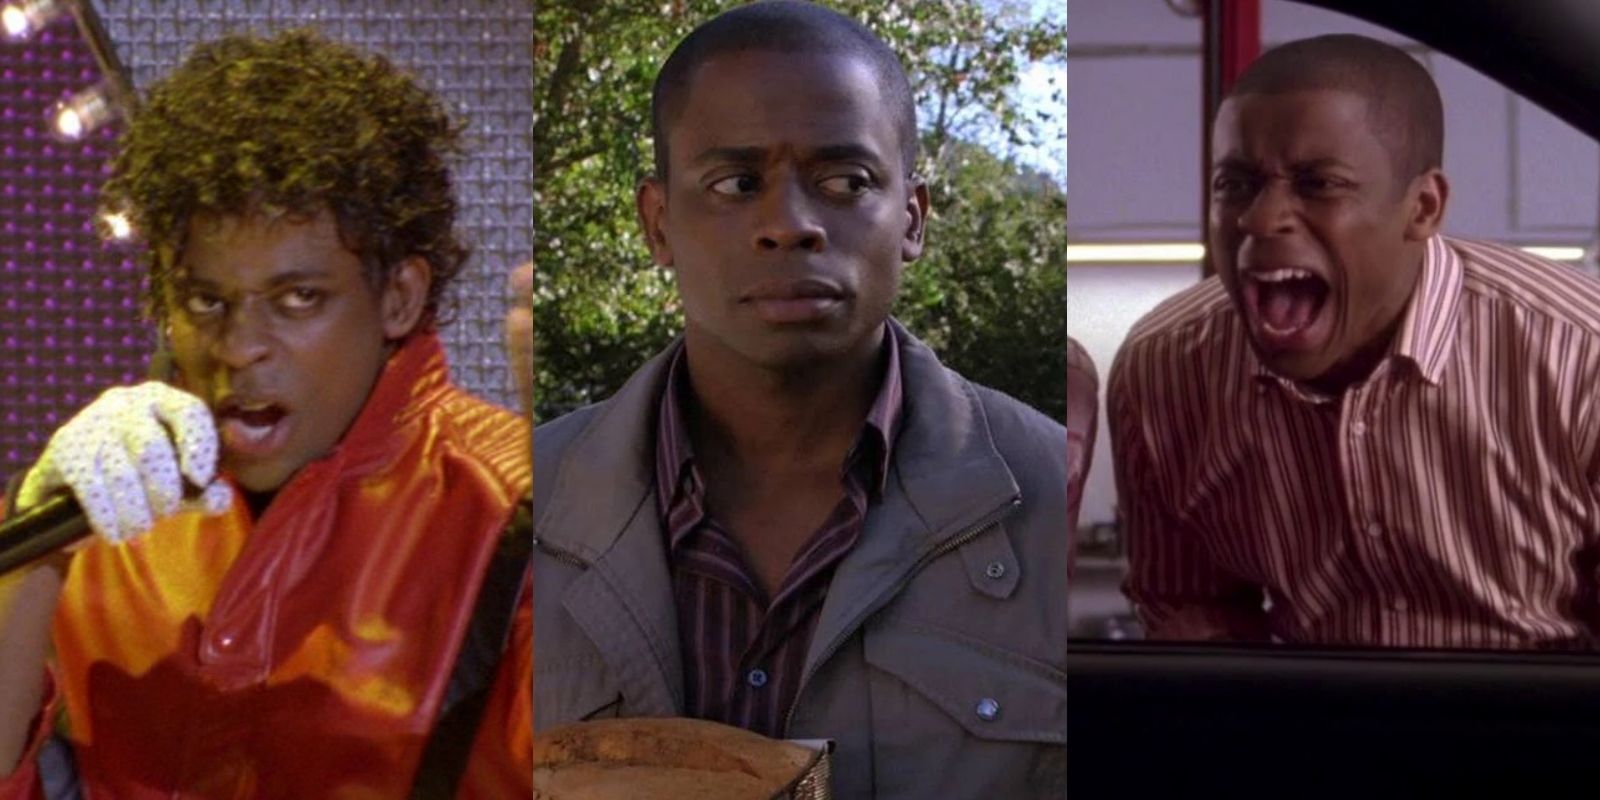 Split image of Burton singing in costume, holding a pie, & screaming in a car window in Psych.